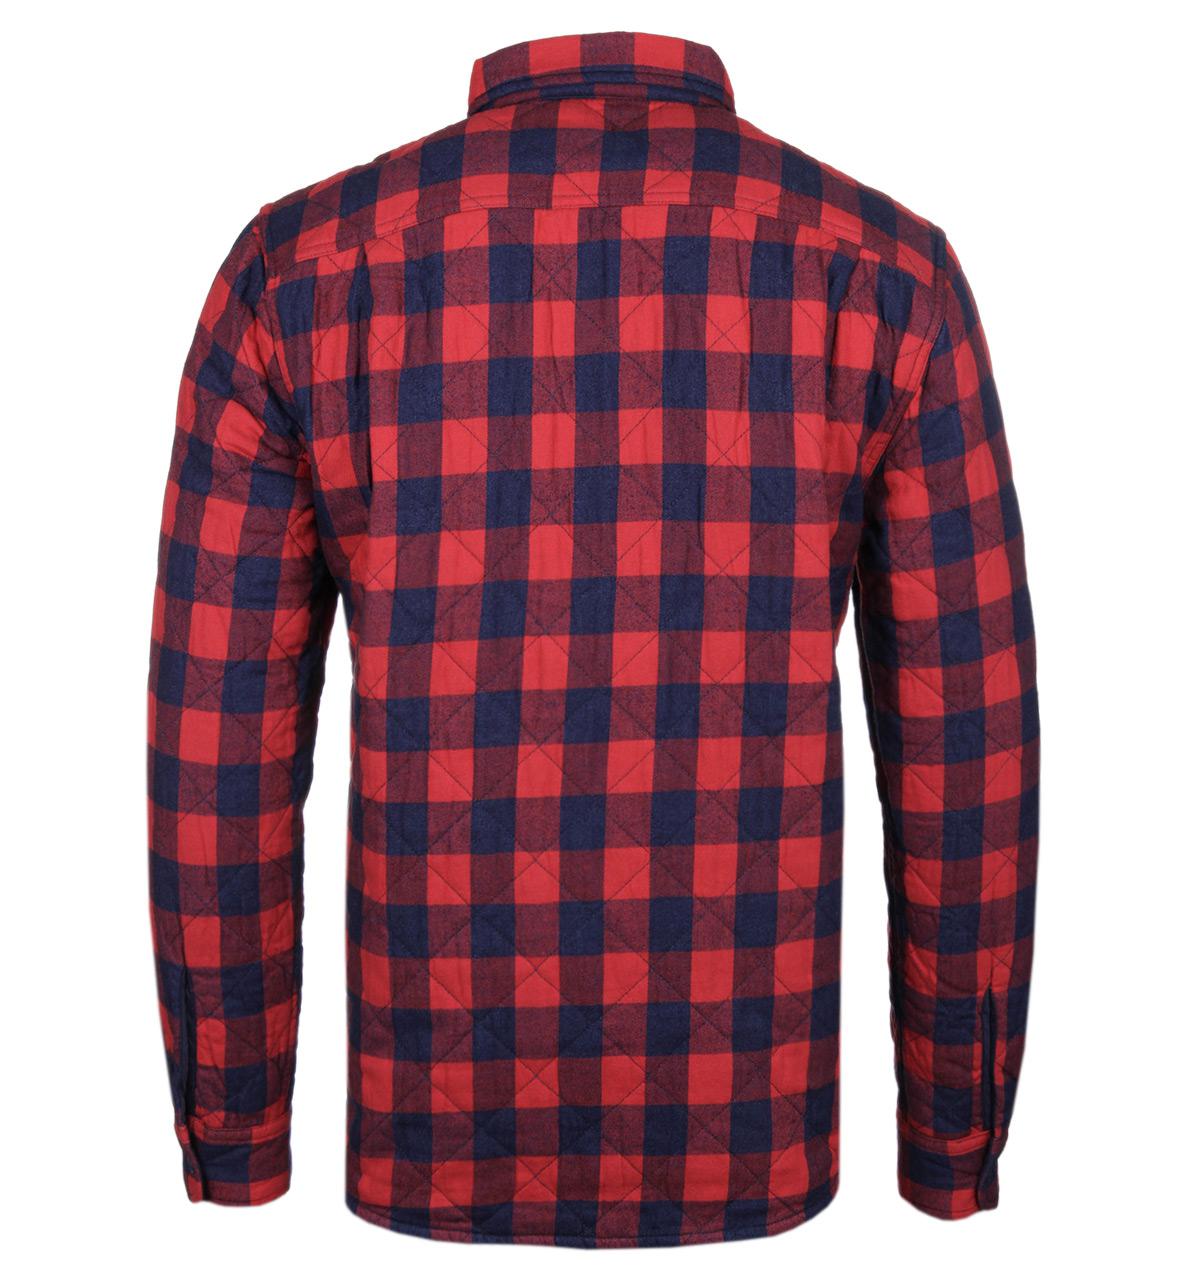 Lyst - Barbour Nitro Rich Red Gingham Checked Overshirt in Red for Men